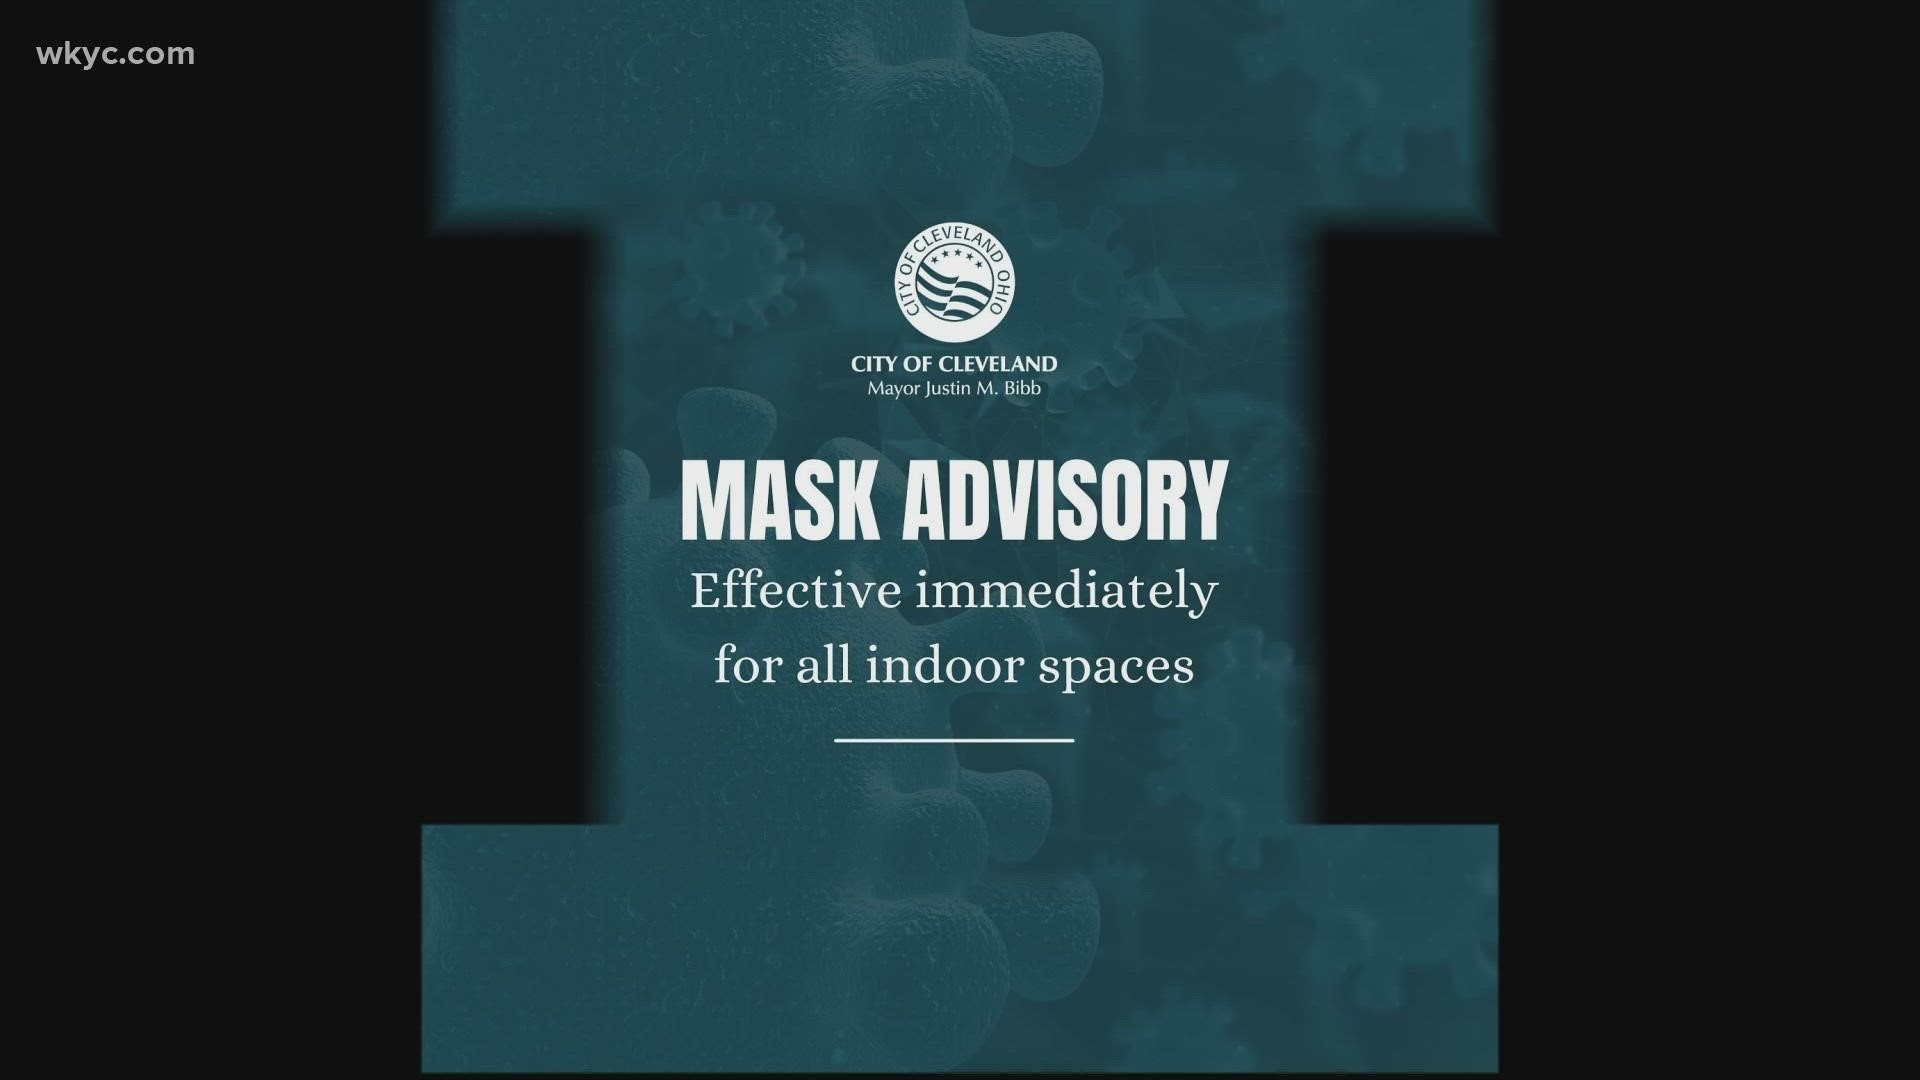 Cleveland Mayor Justin Bibb has issued a mask advisory effective immediately for all indoor spaces through Jan. 31.